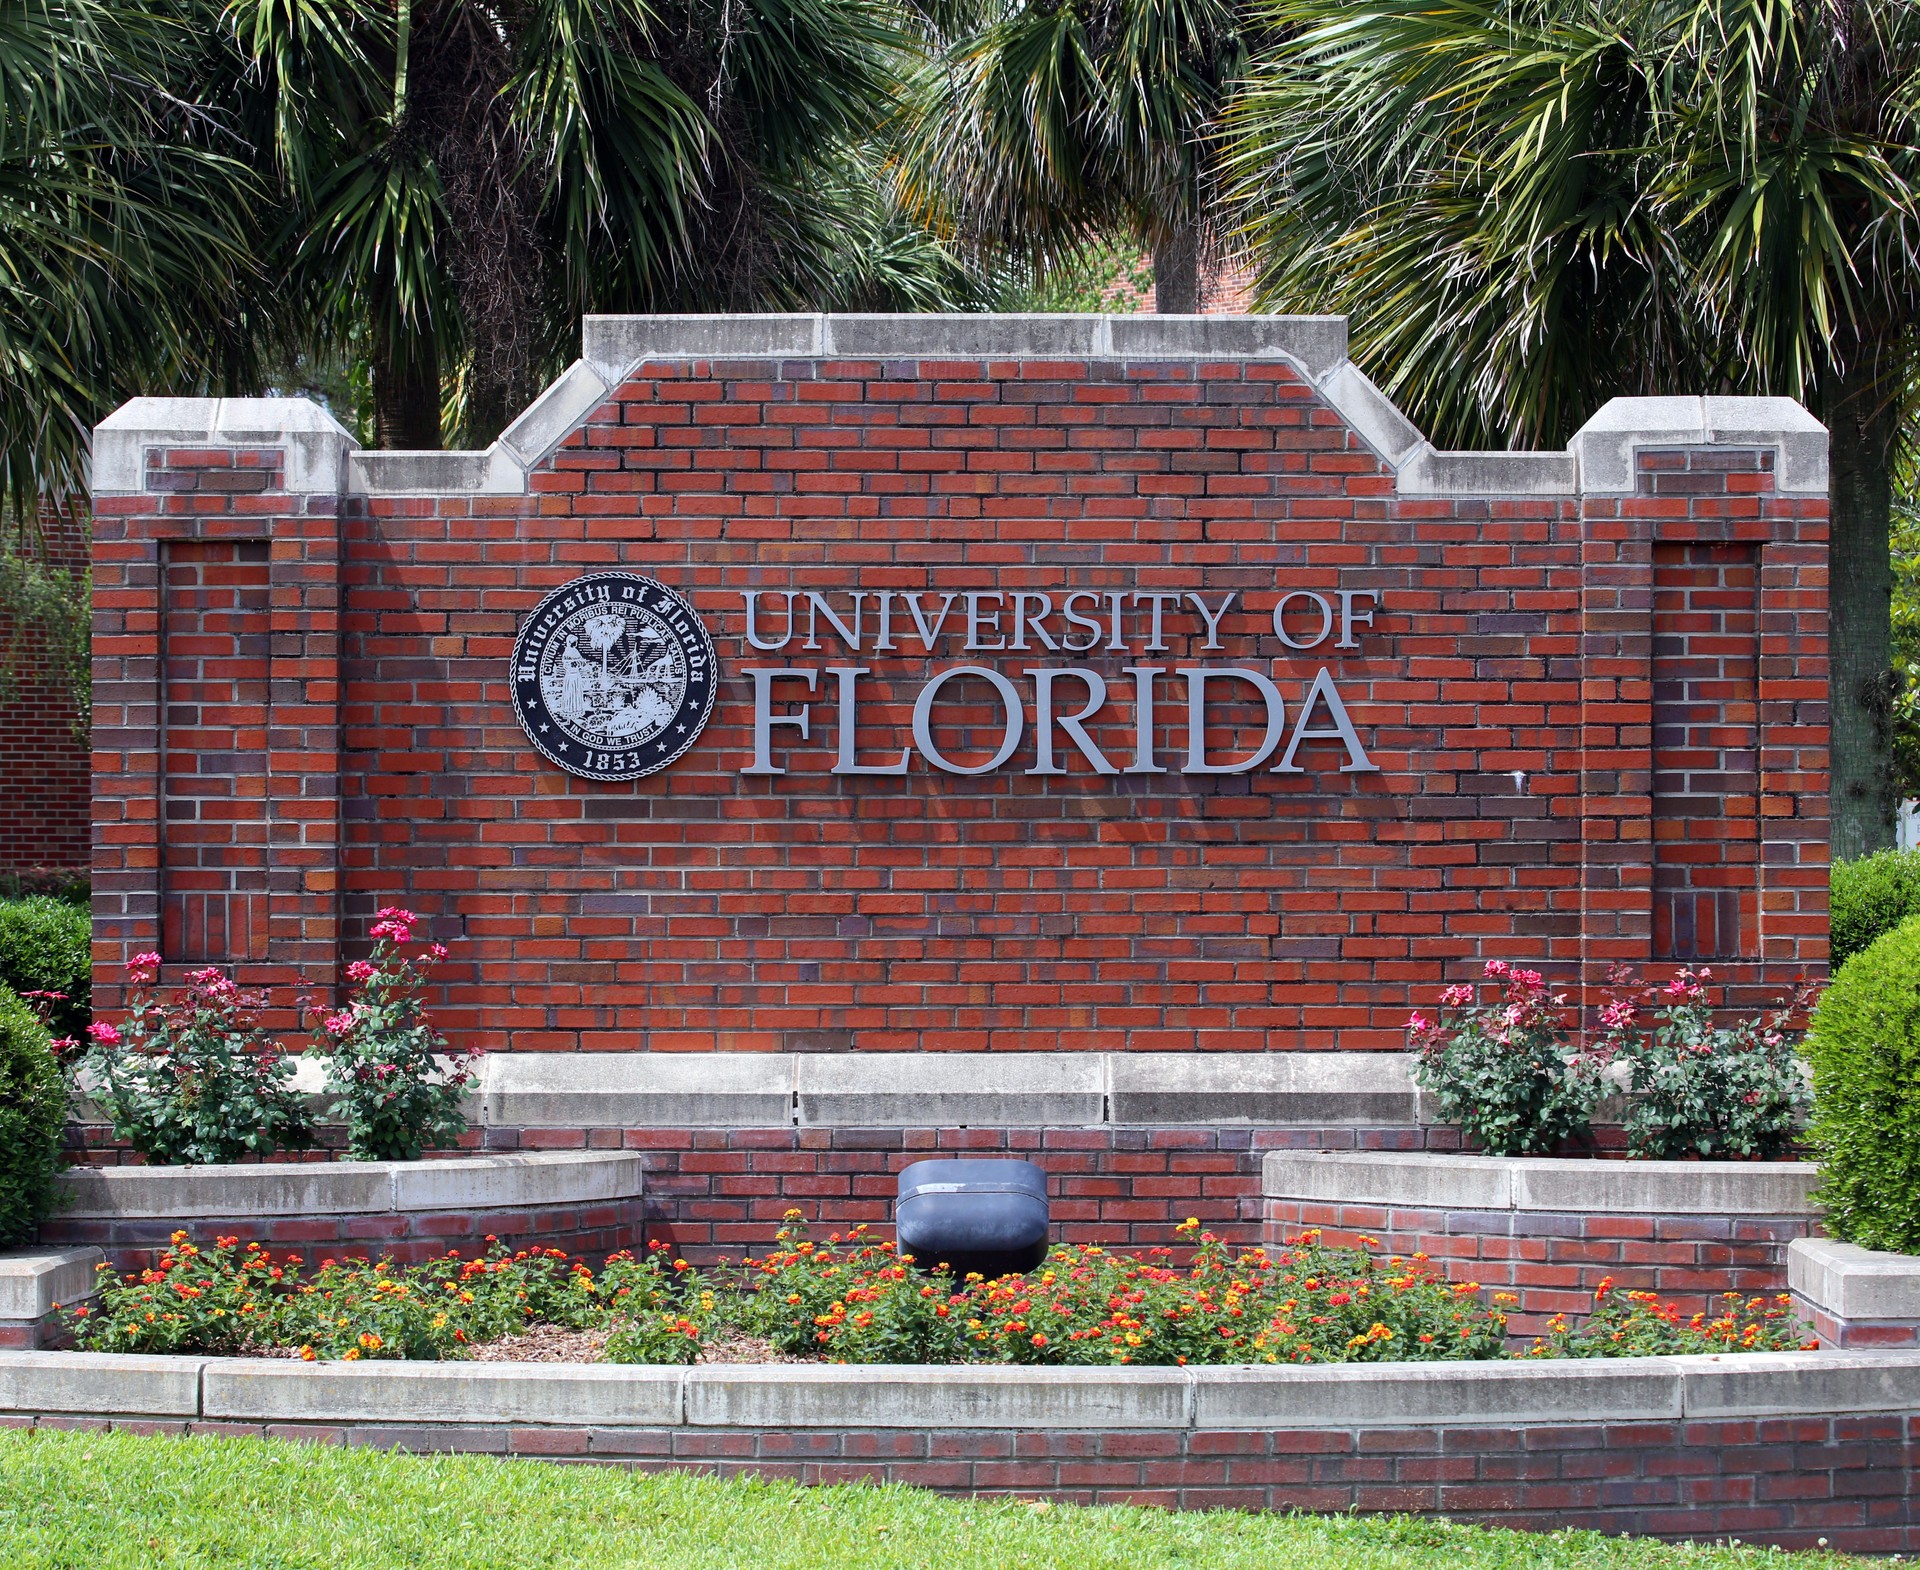 A low brick wall adorned with the University of Florida's name and seal.